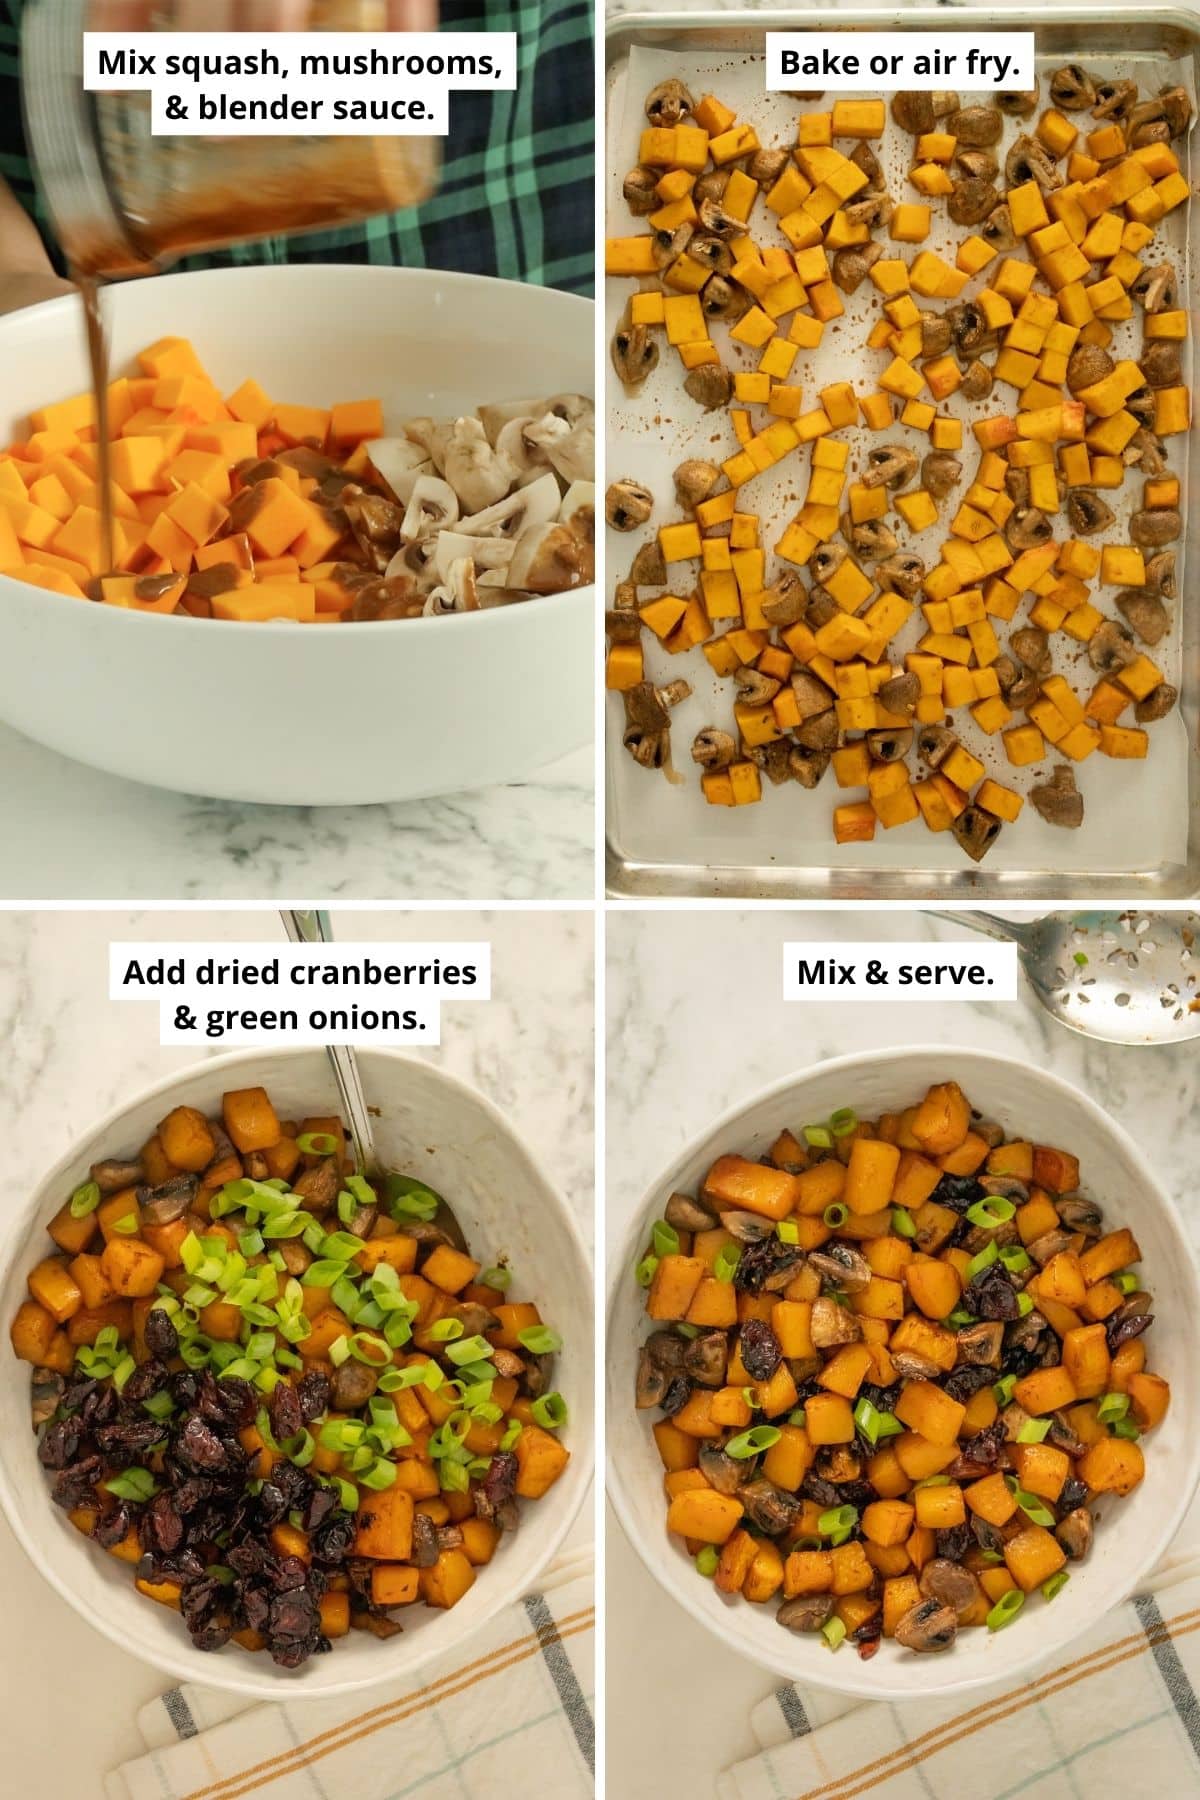 image collage showing the cut up butternut squash and mushrooms with dressing being poured on, then on the sheet ready to bake and before and after tossing in the green onion and cranberries